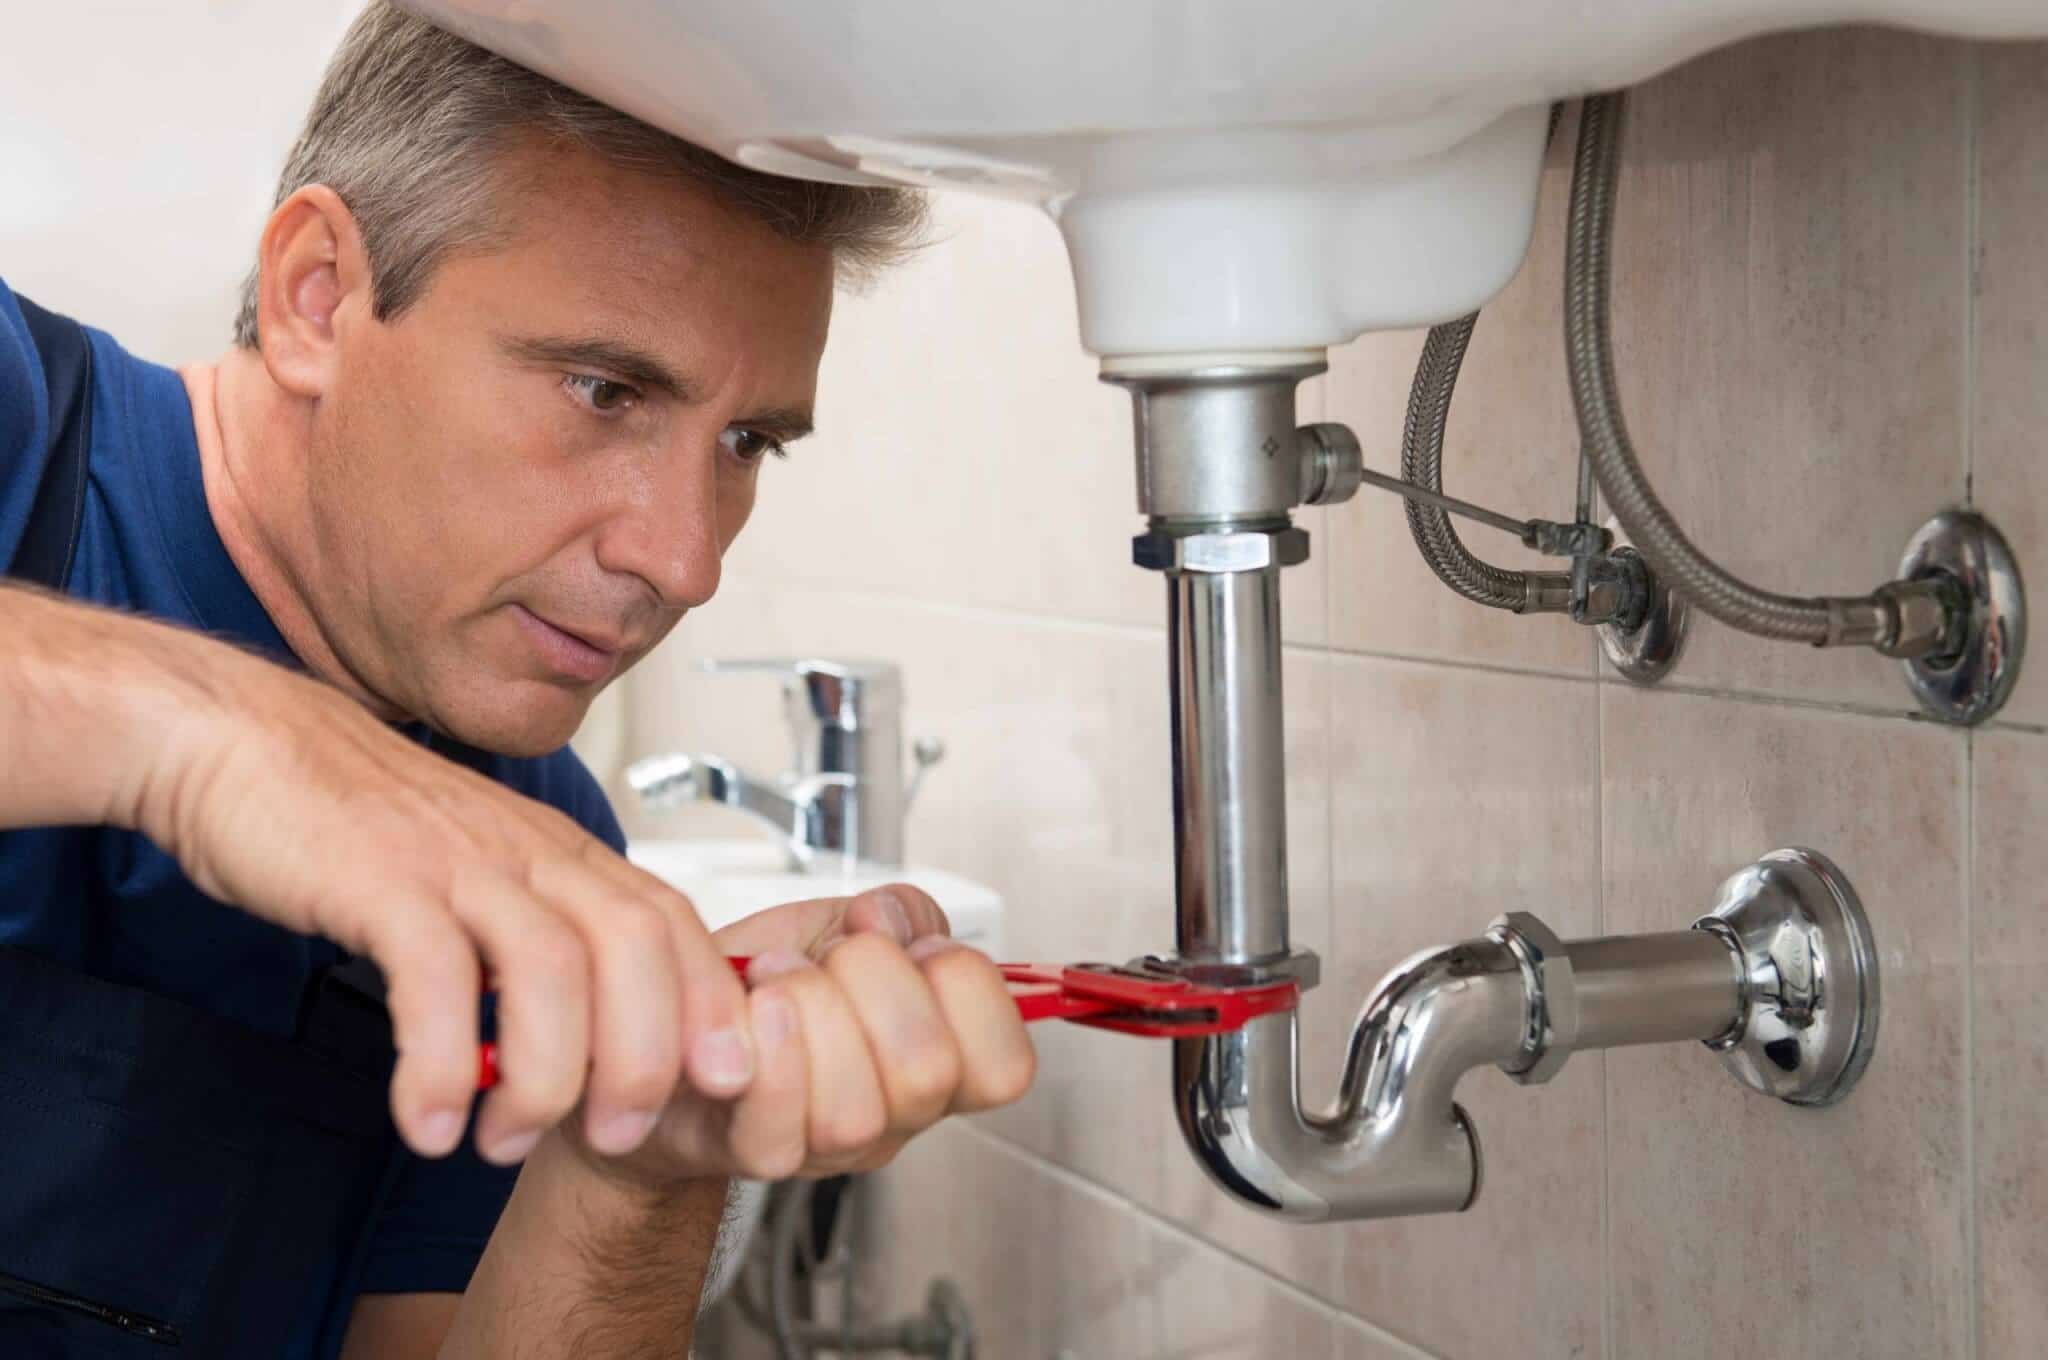 How Does a Plumber Fix Drain Clogging? Disassembling the sink by a professional